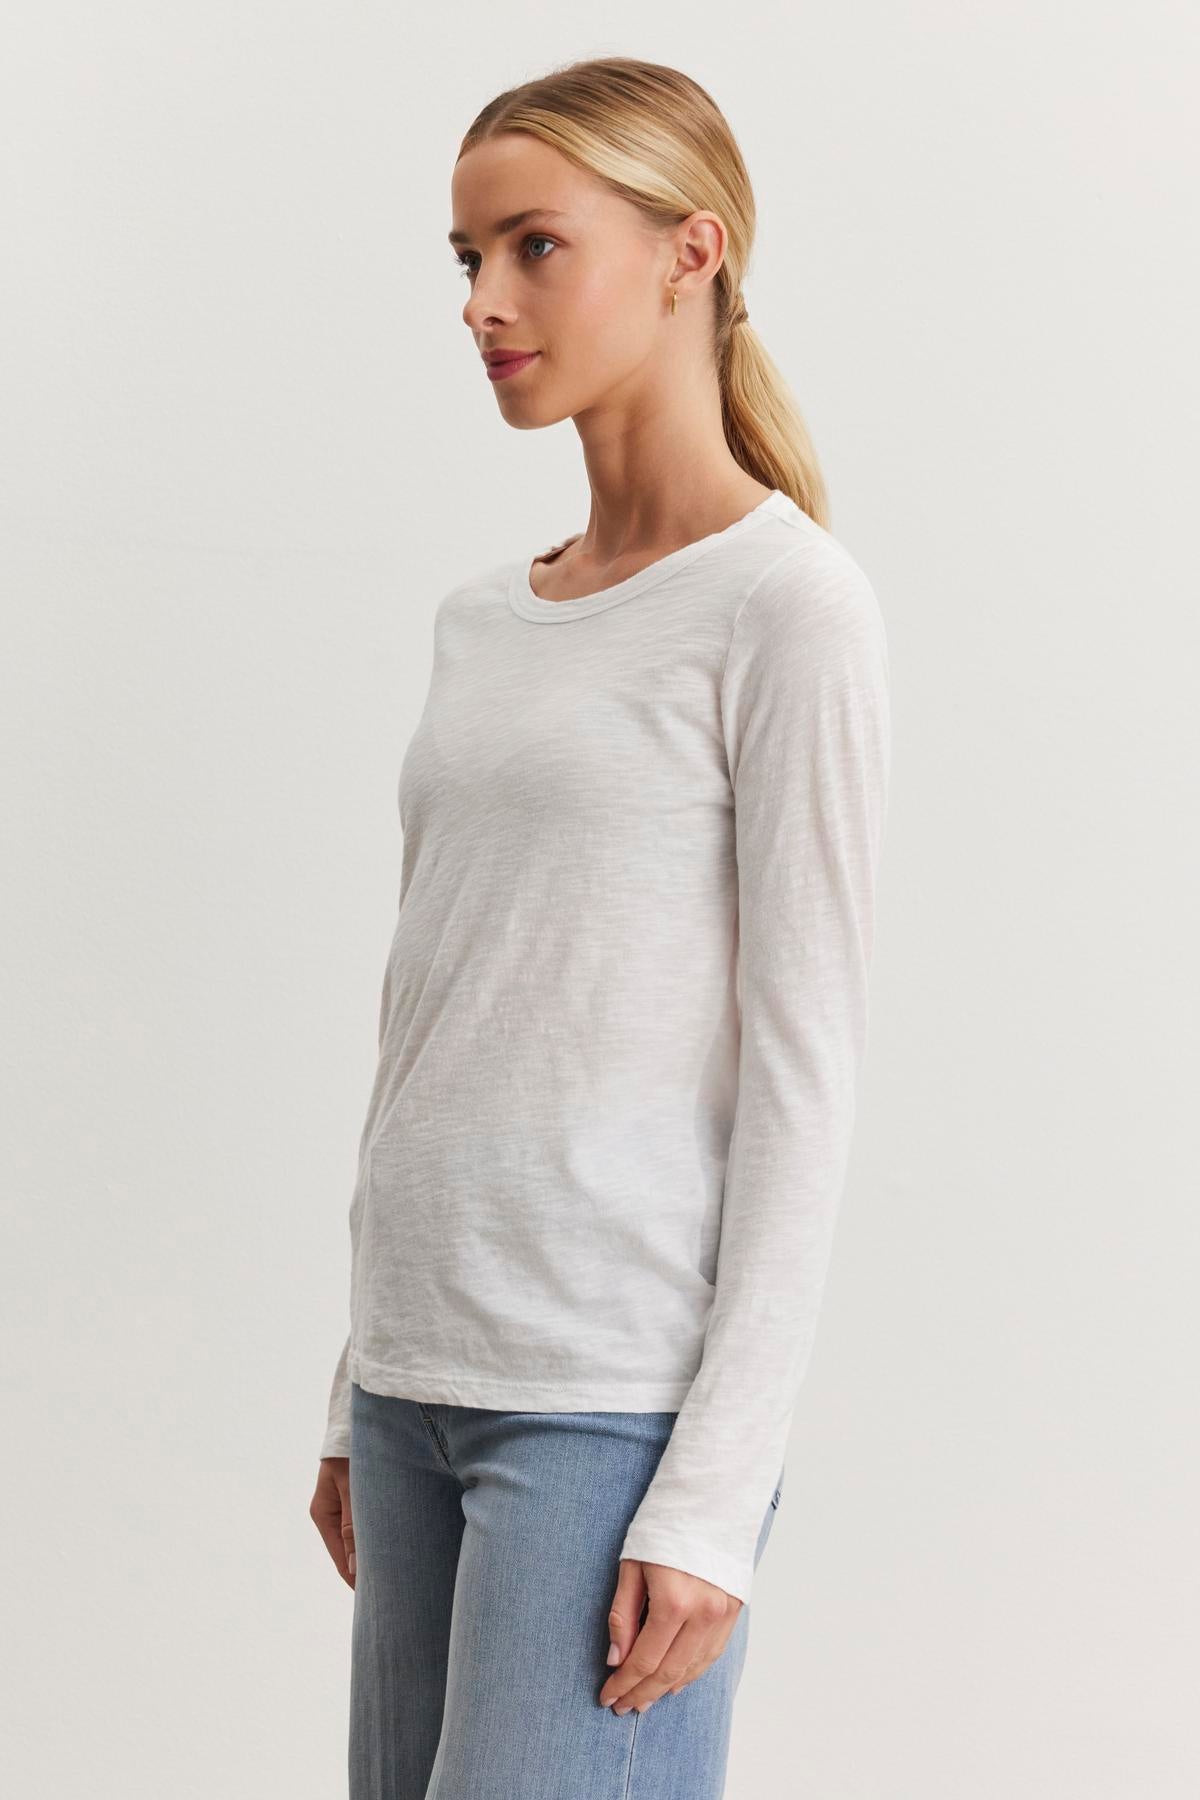   A person with blonde hair tied back in a ponytail is wearing the LIZZIE TEE by Velvet by Graham & Spencer and blue jeans, standing against a plain white background. 